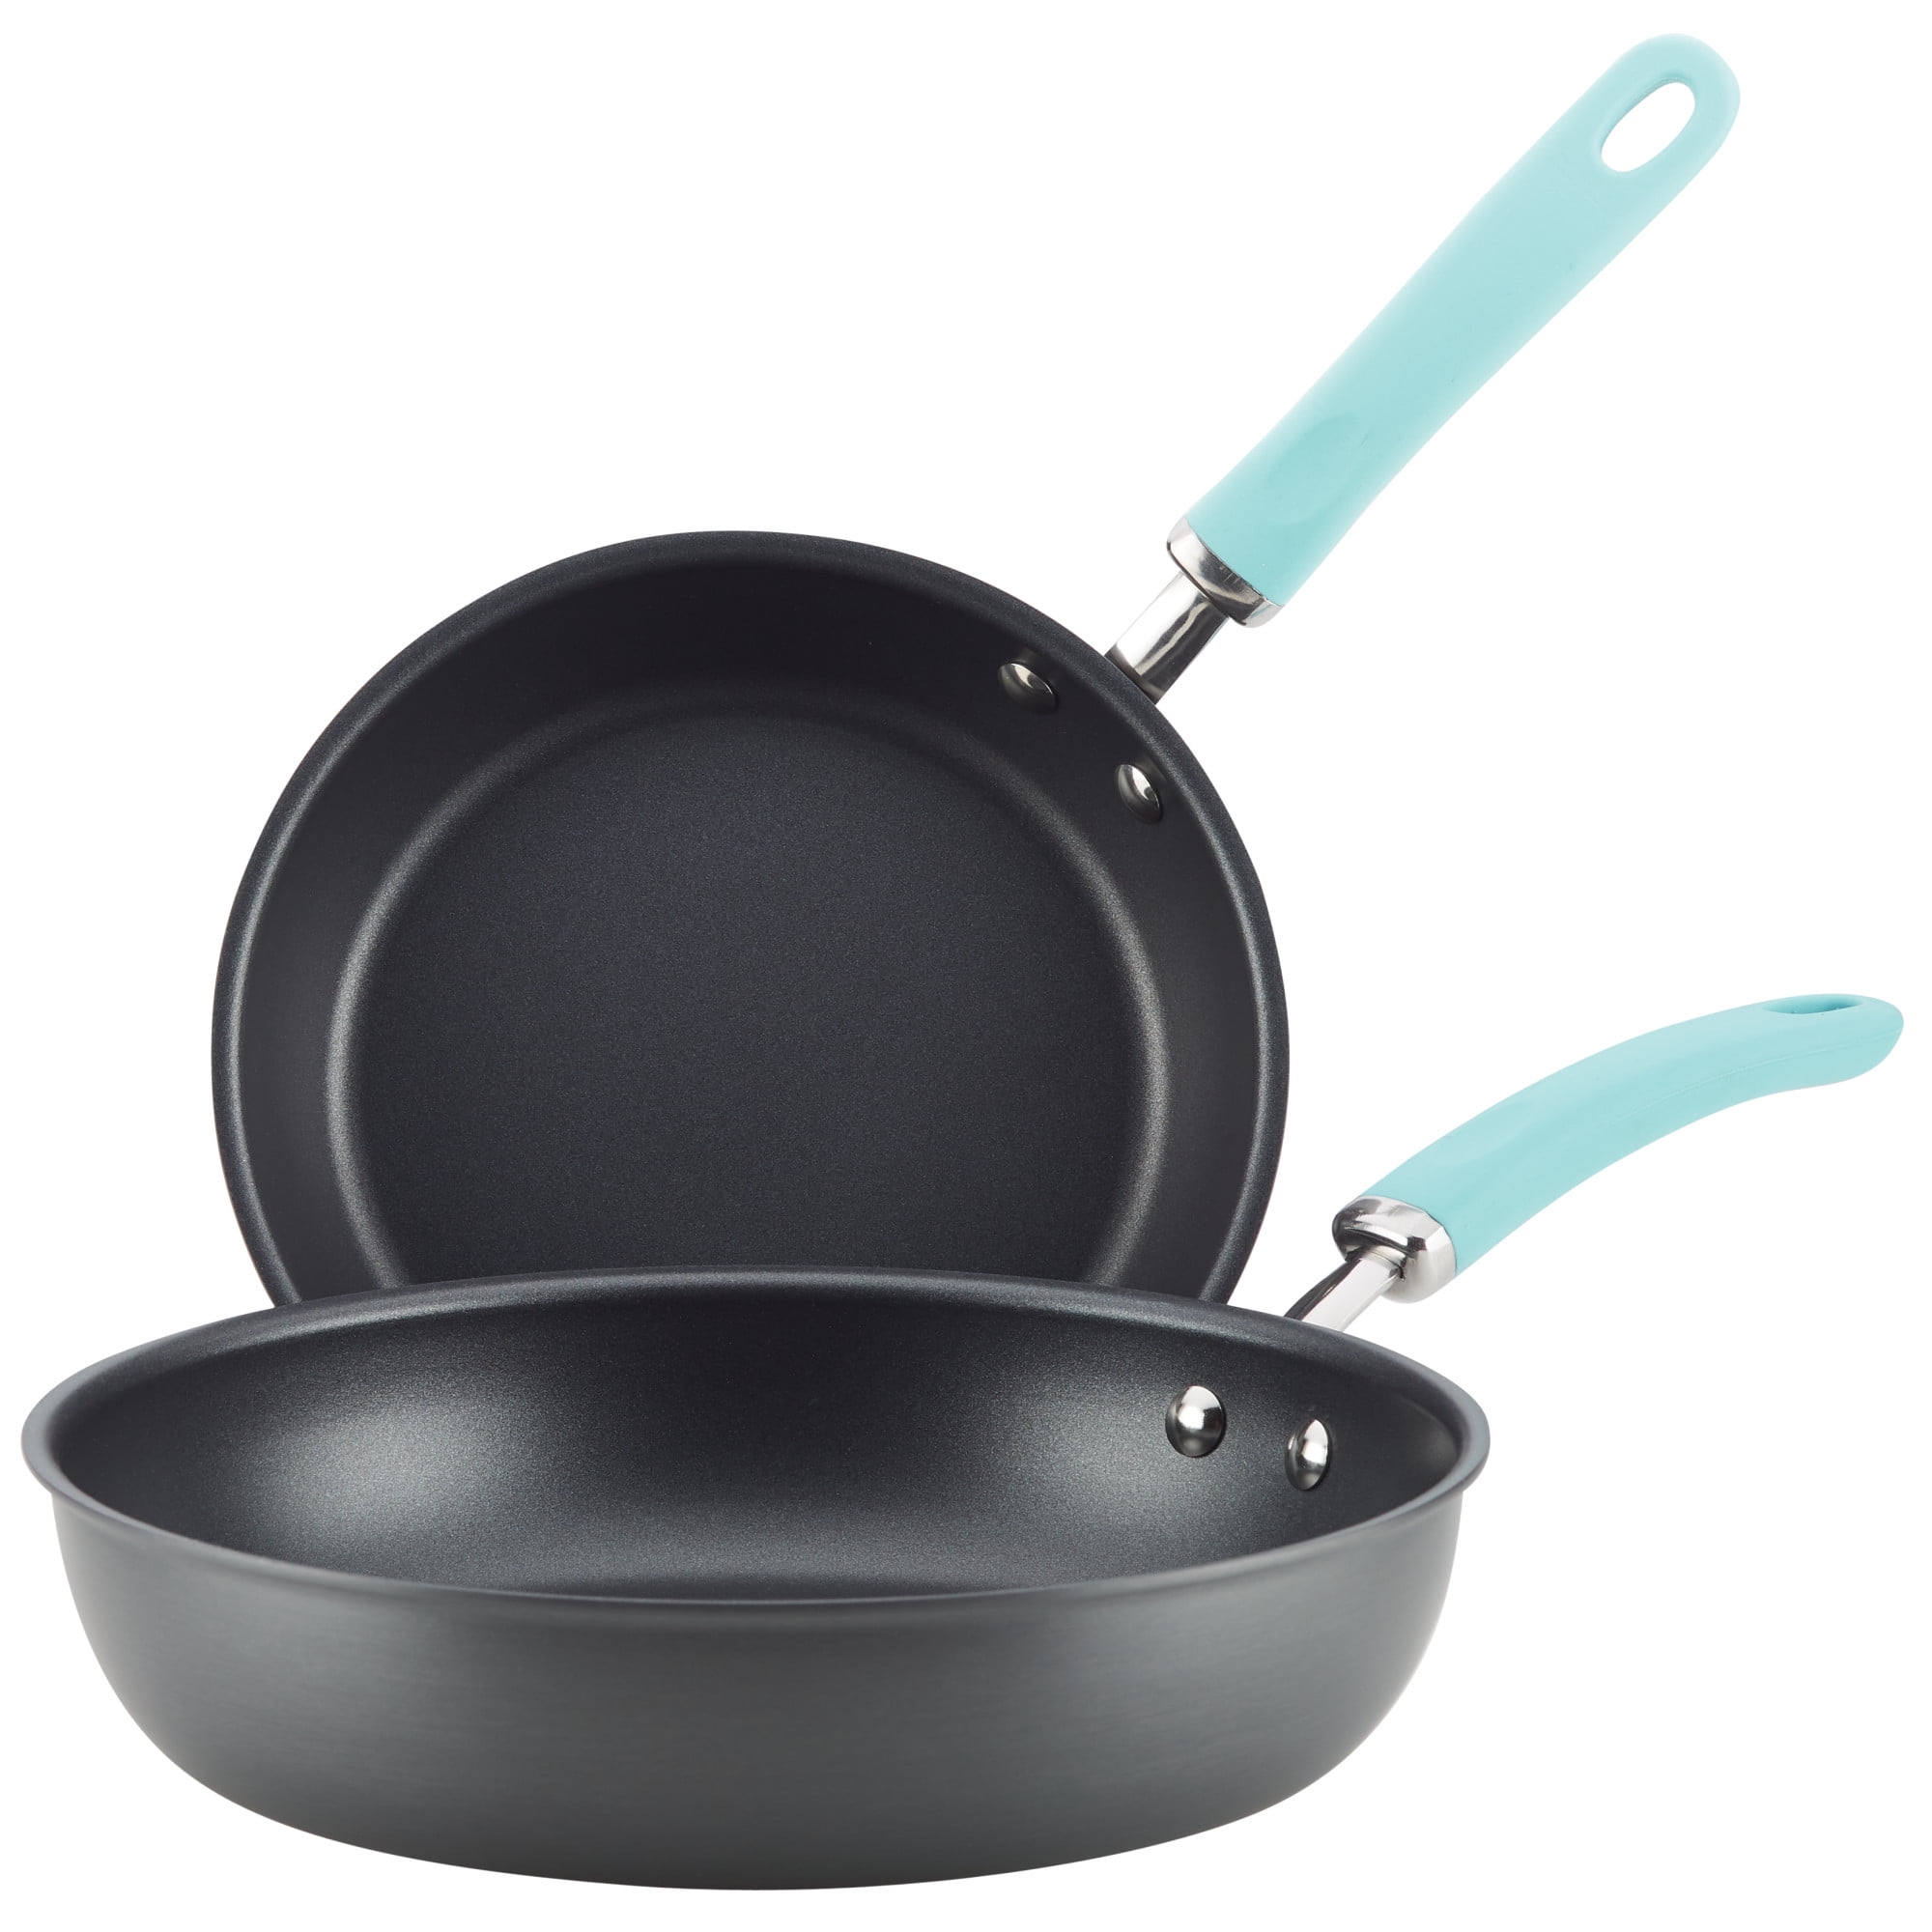 ALL CLAD STAINLESS STEEL & NON STICK SURFACE 9 1/2" INCH SKILLET  FRYING PAN